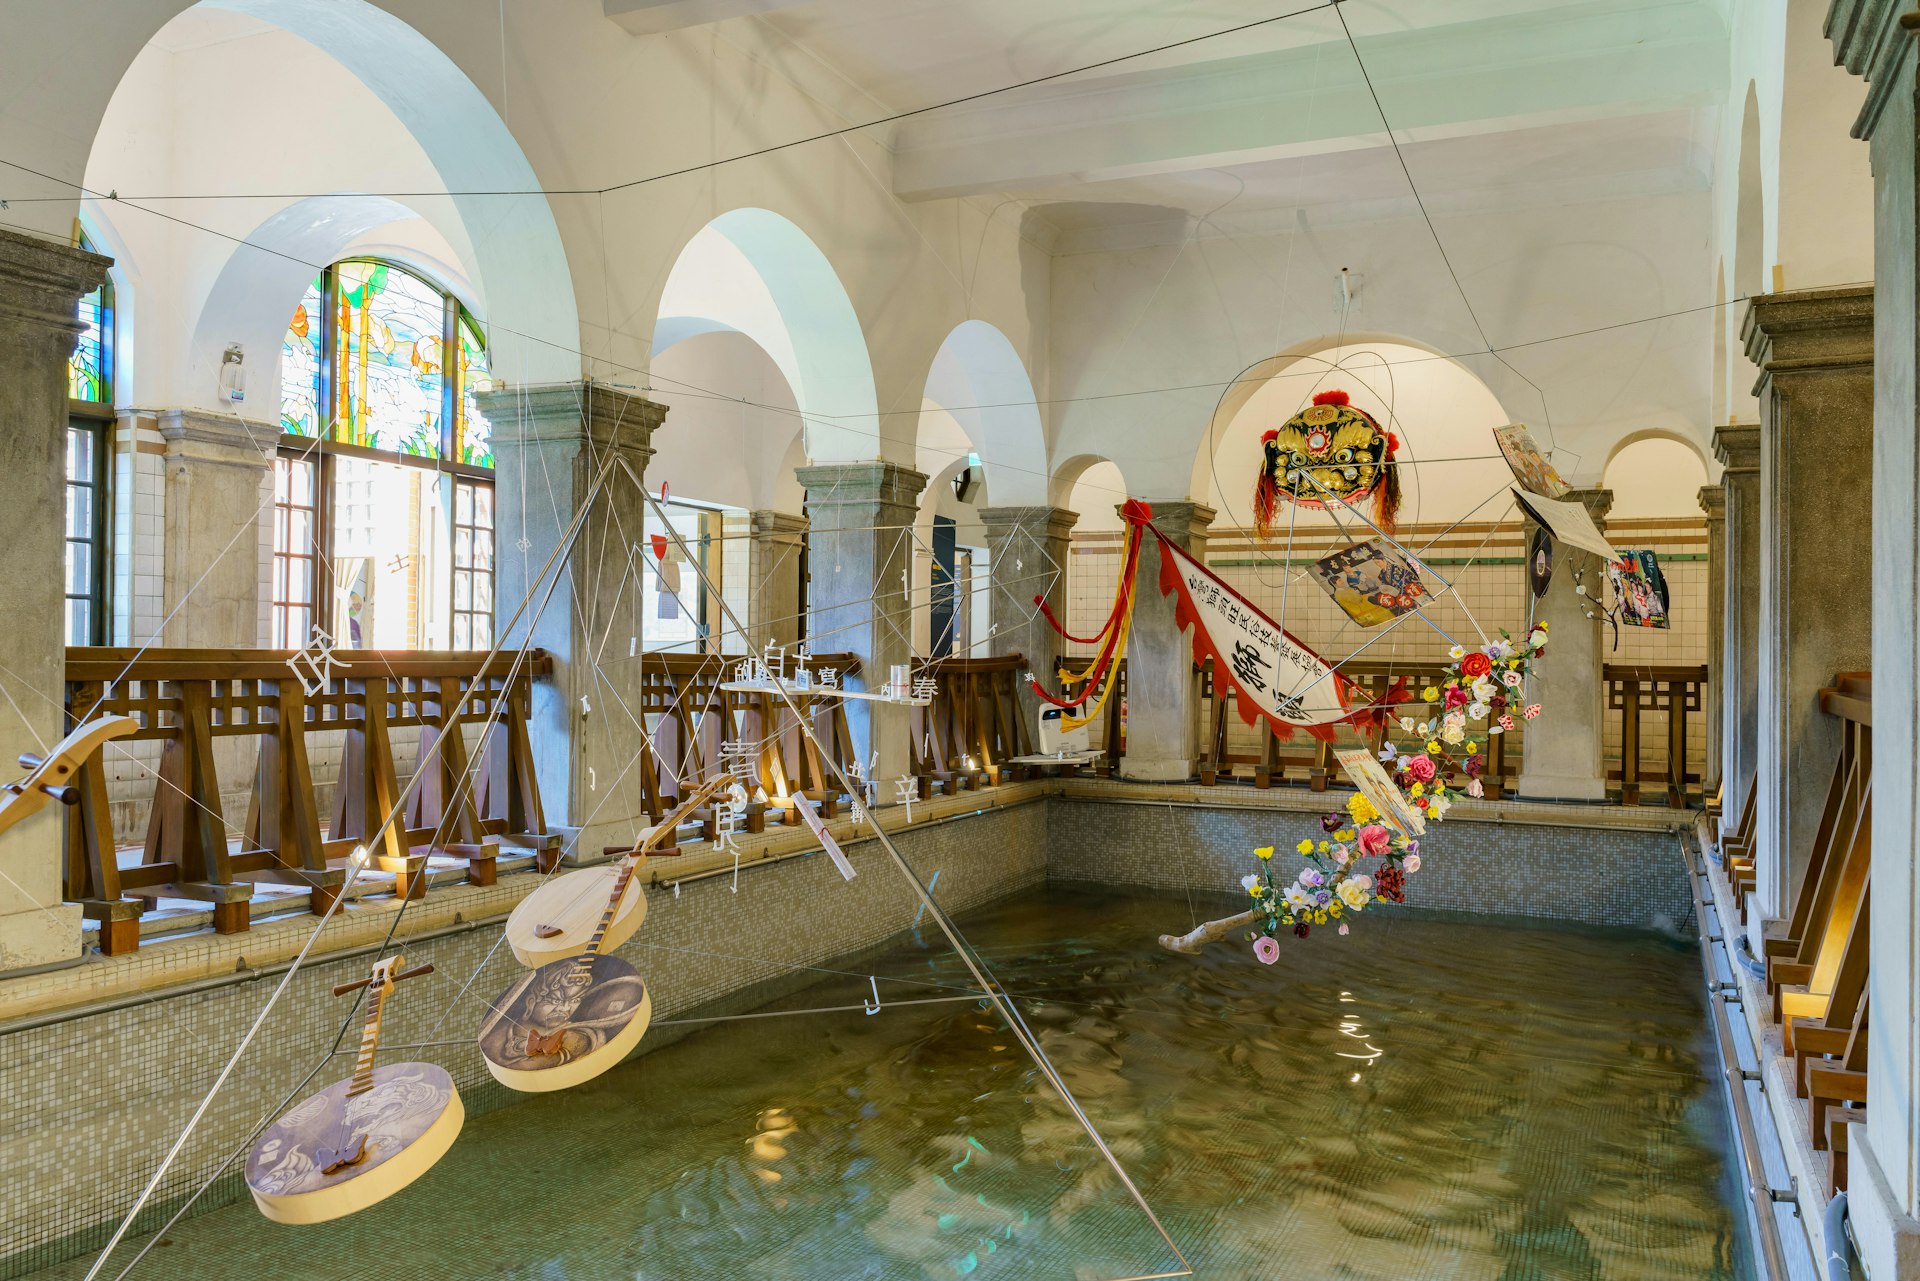 A display in the former baths at the Beitou Hot Spring Museum, Taipei, Taiwan